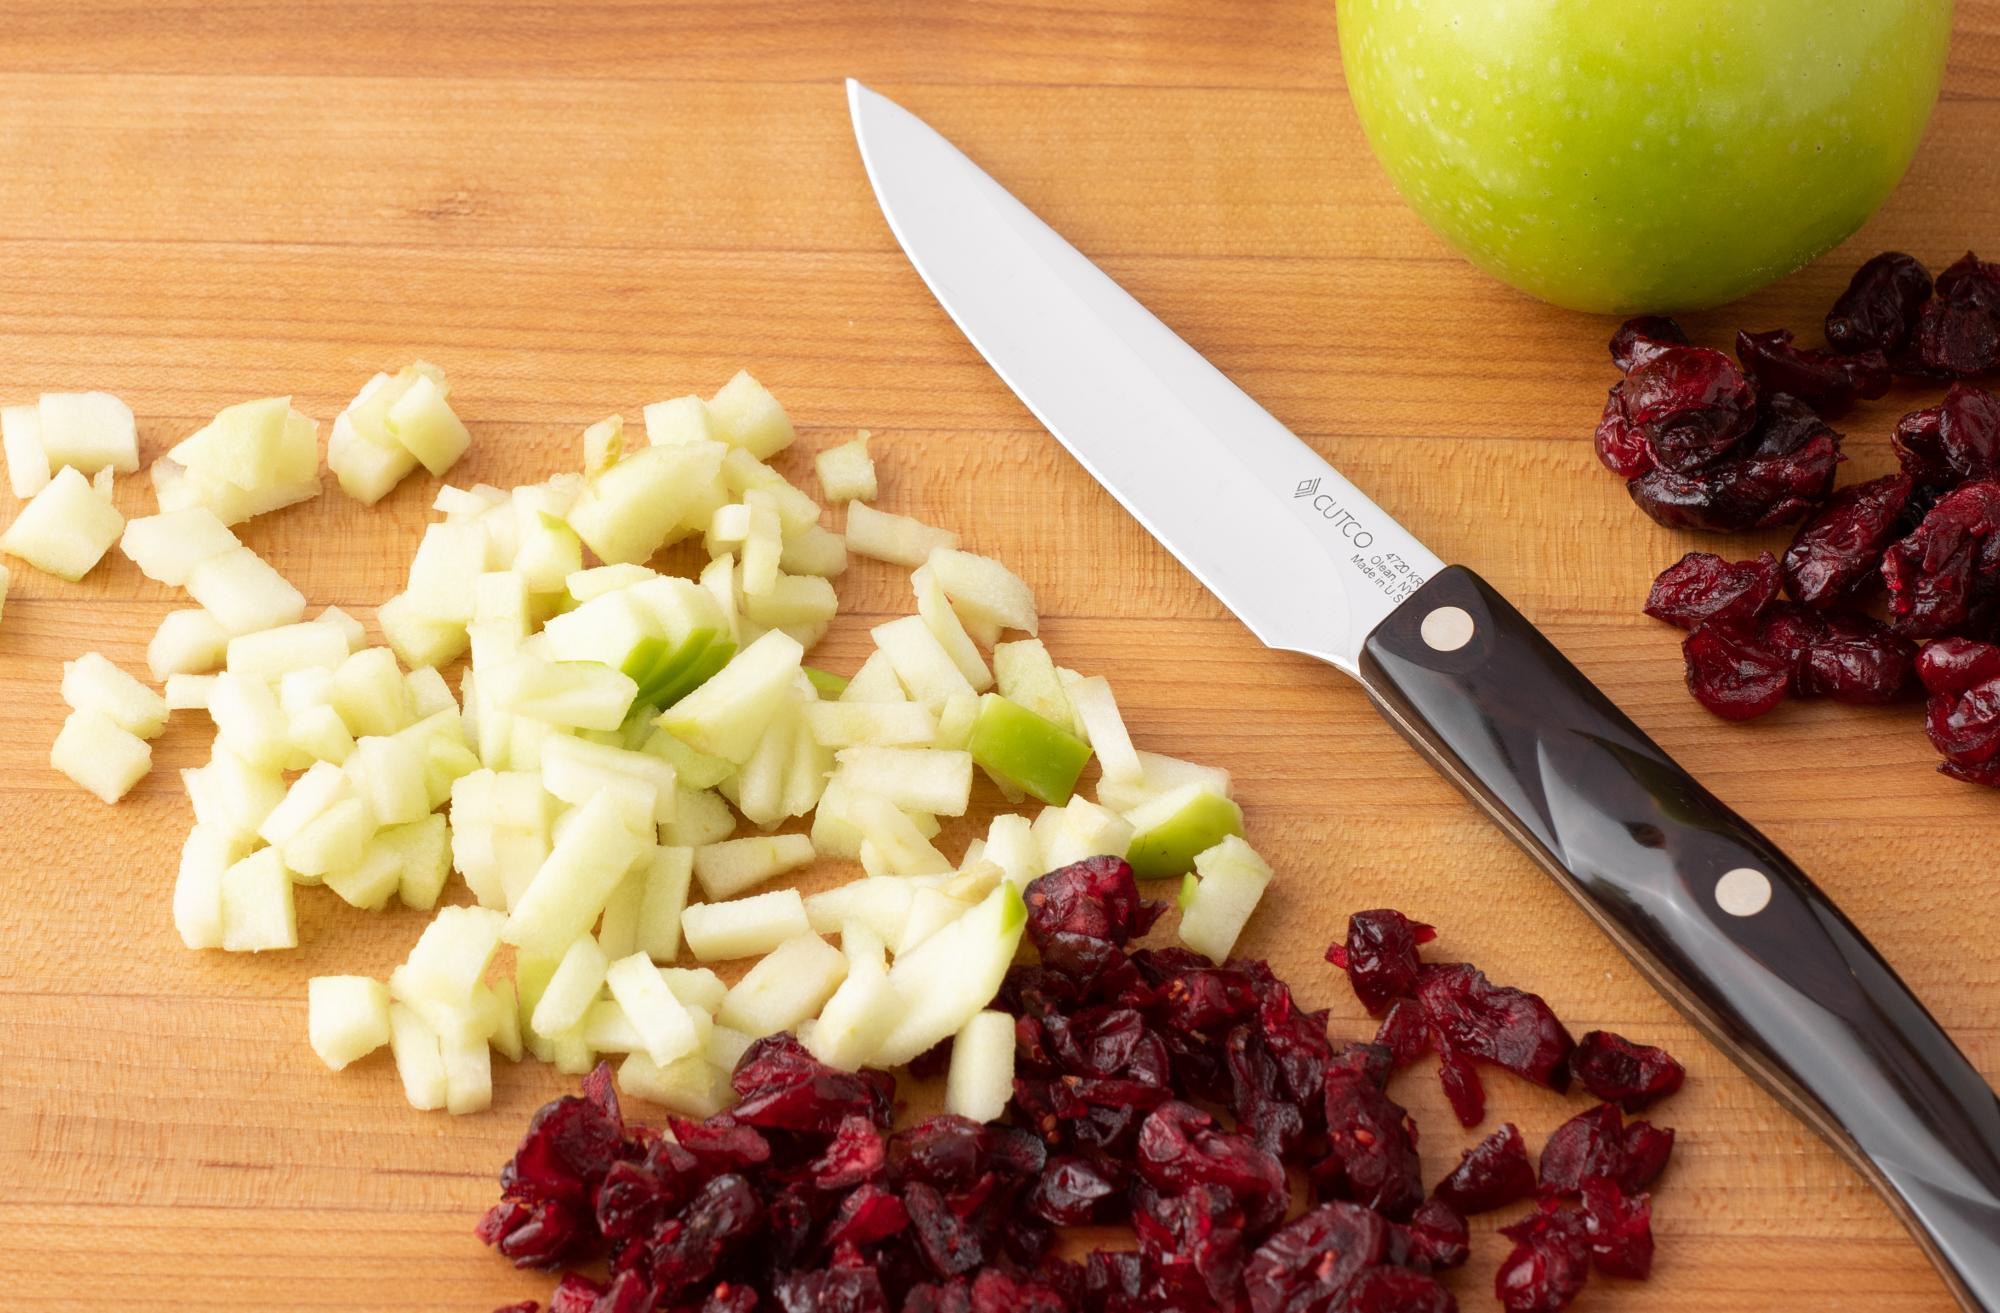 Dice the fruit with a Gourmet Paring Knife.